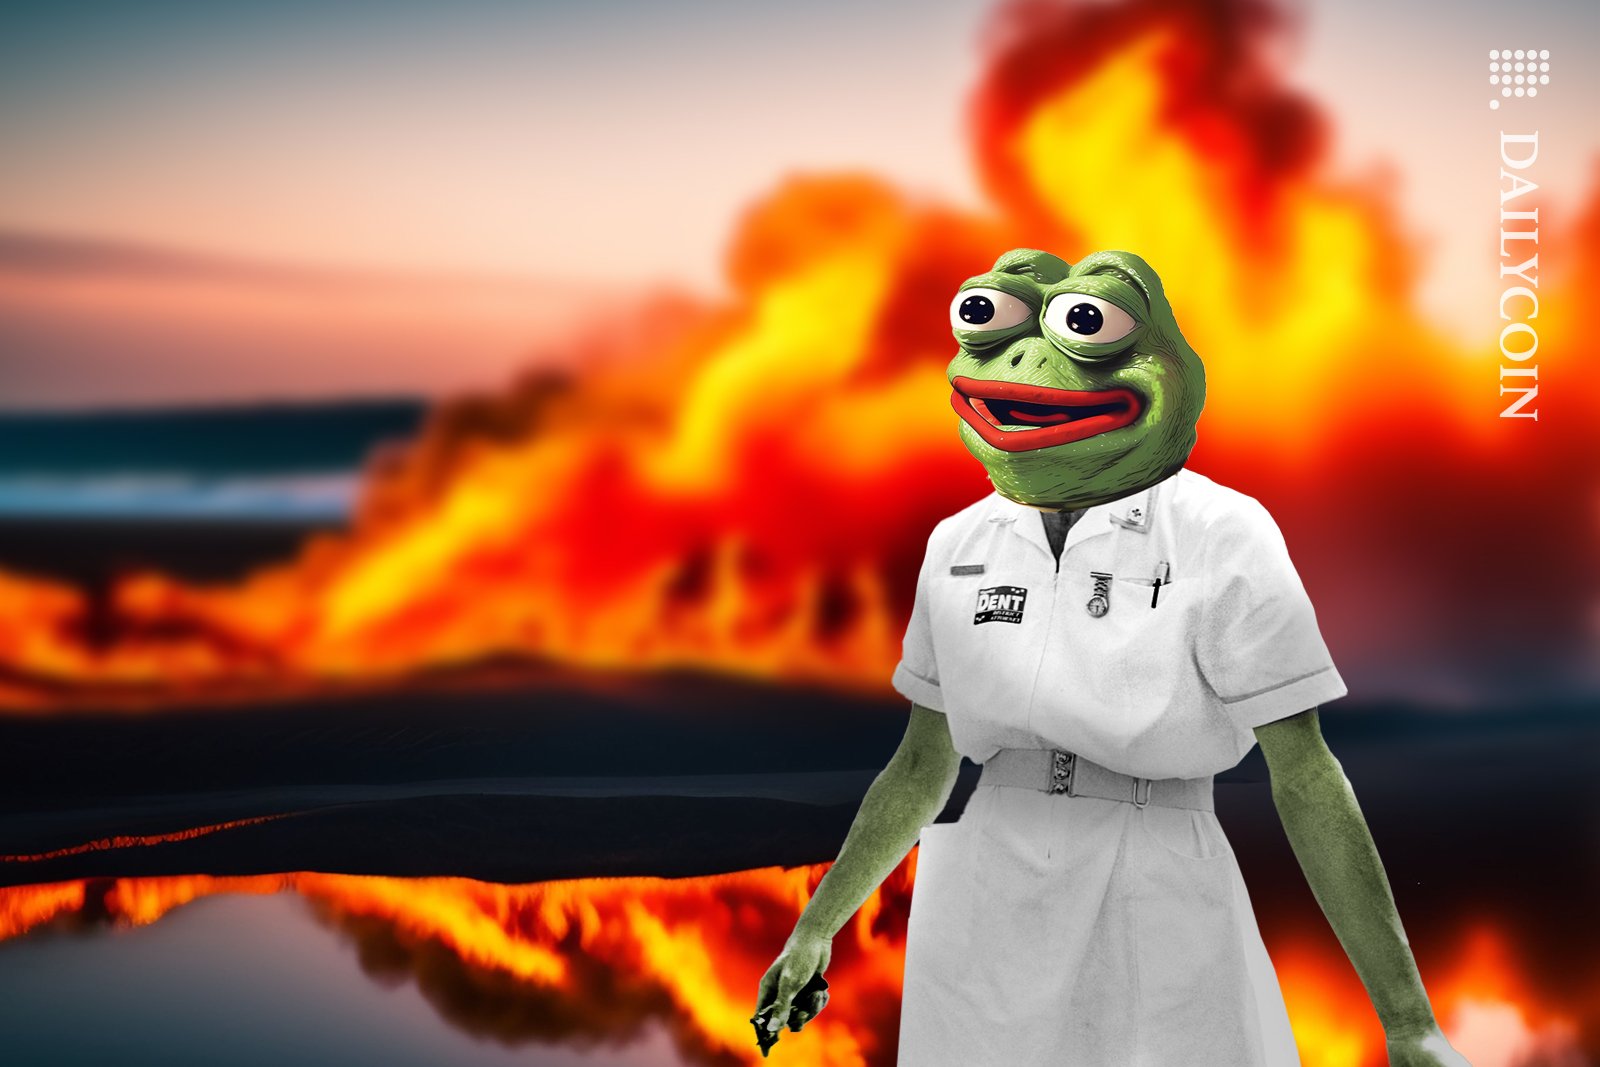 Pepe in Joker movie hospital scene outfit, and wild fire behind him.